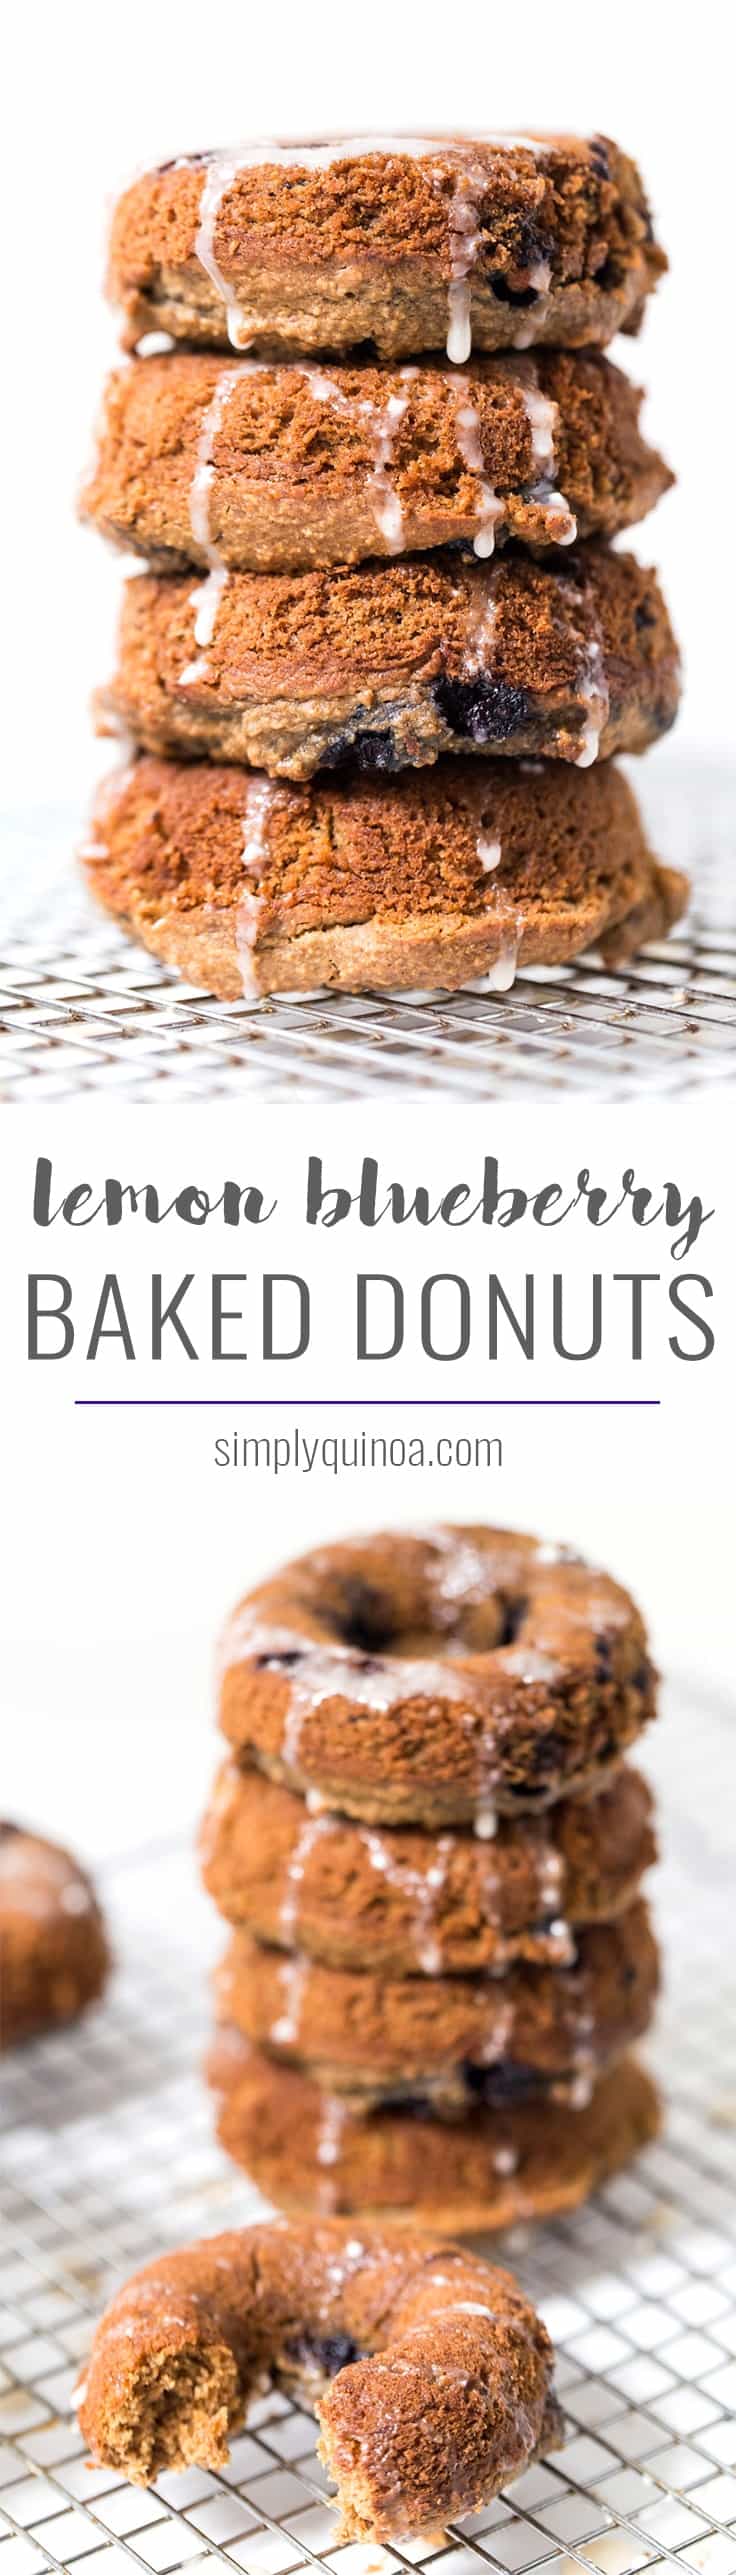 These Lemon Blueberry BAKED Donuts are light, tender and soft and MADE IN THE BLENDER! With 100% pure ingredients, you can feel great about eating one! [vegan + gf]